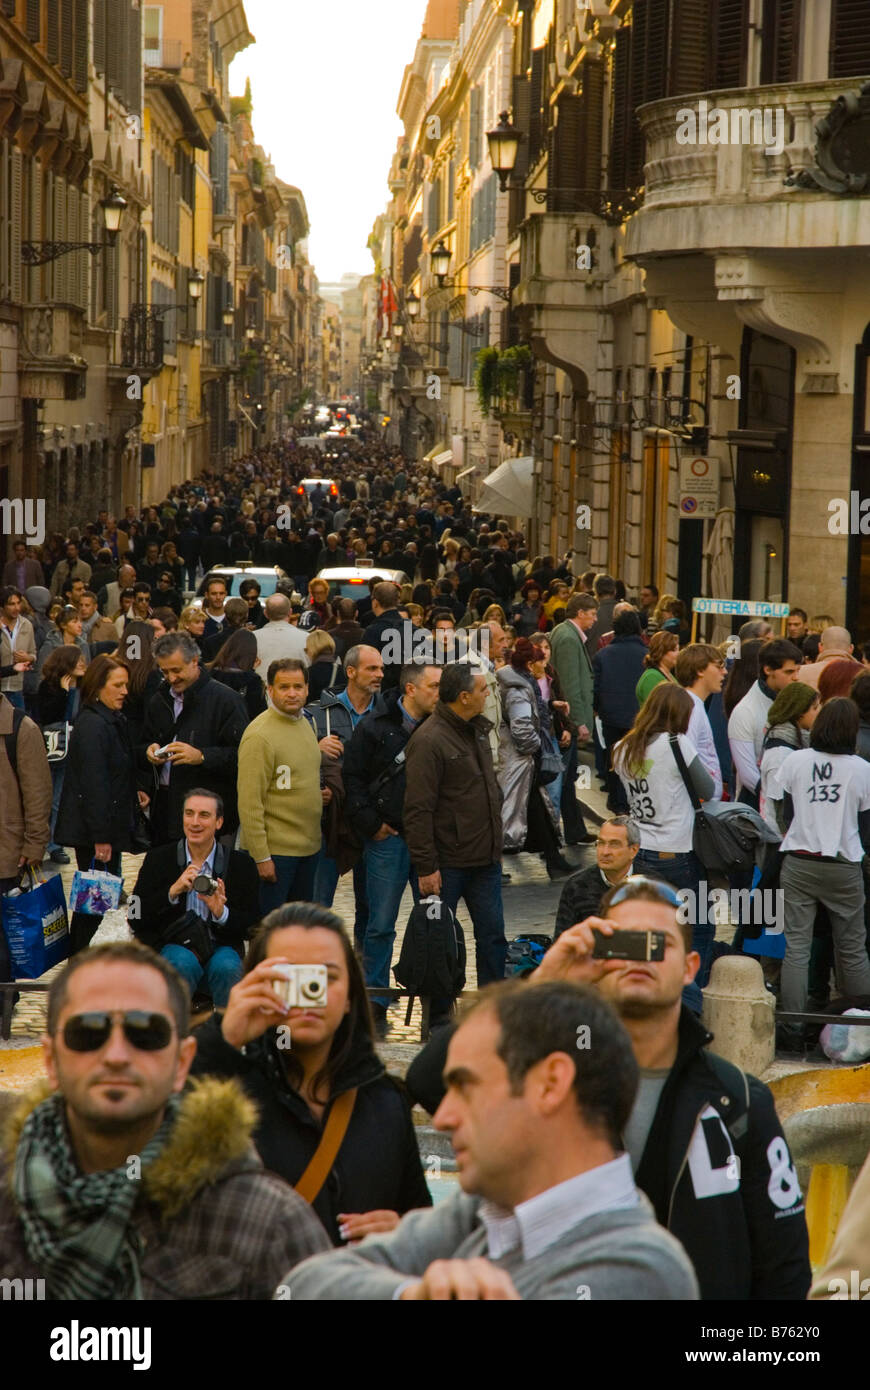 People at Piazza di Spagna square in centro storico Rome Italy Europe Stock Photo